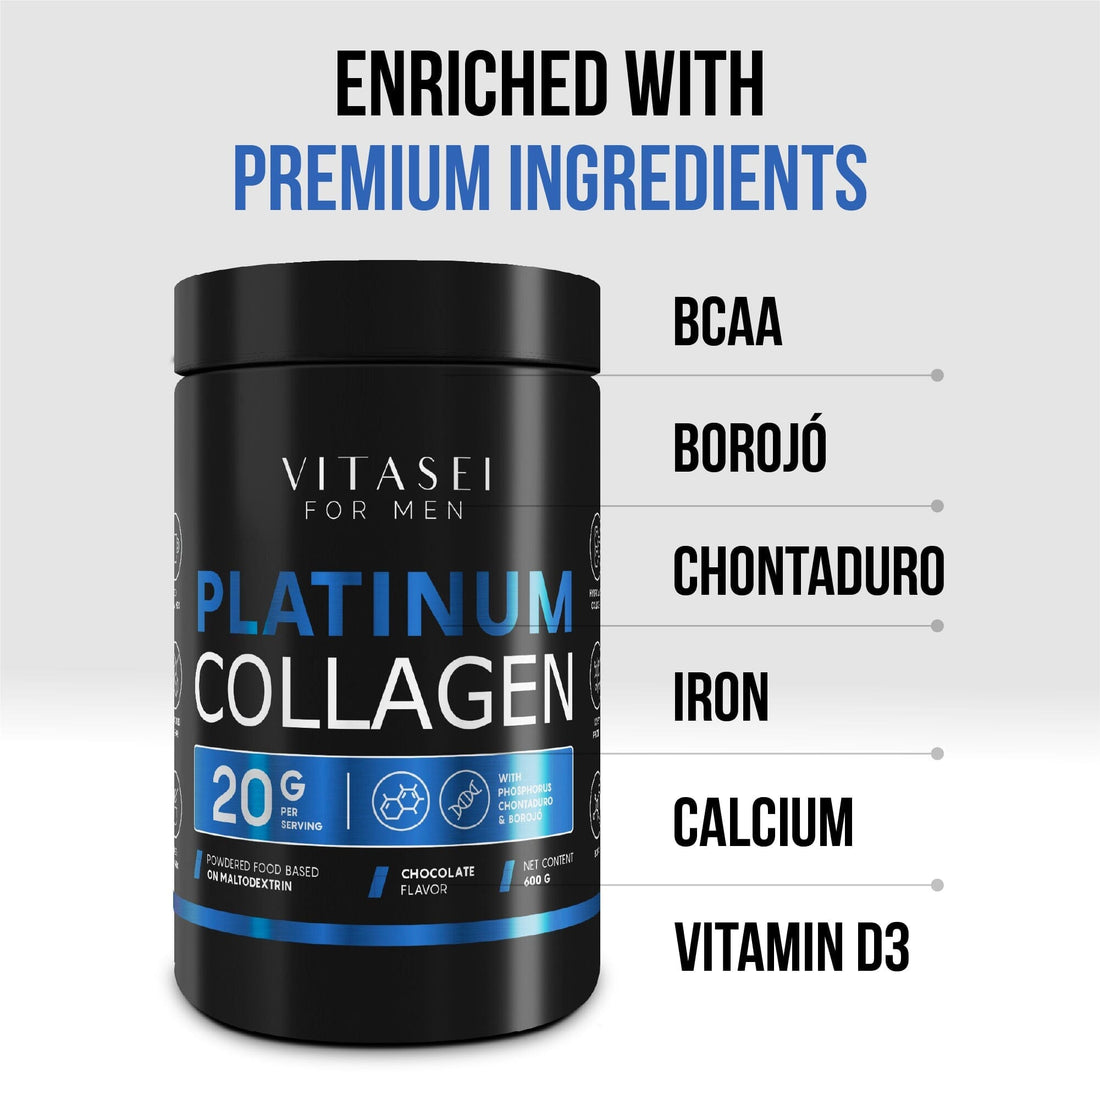 Combo 2 Hydrolyzed Collagen With Bcaas For Men- Maximum Absorption